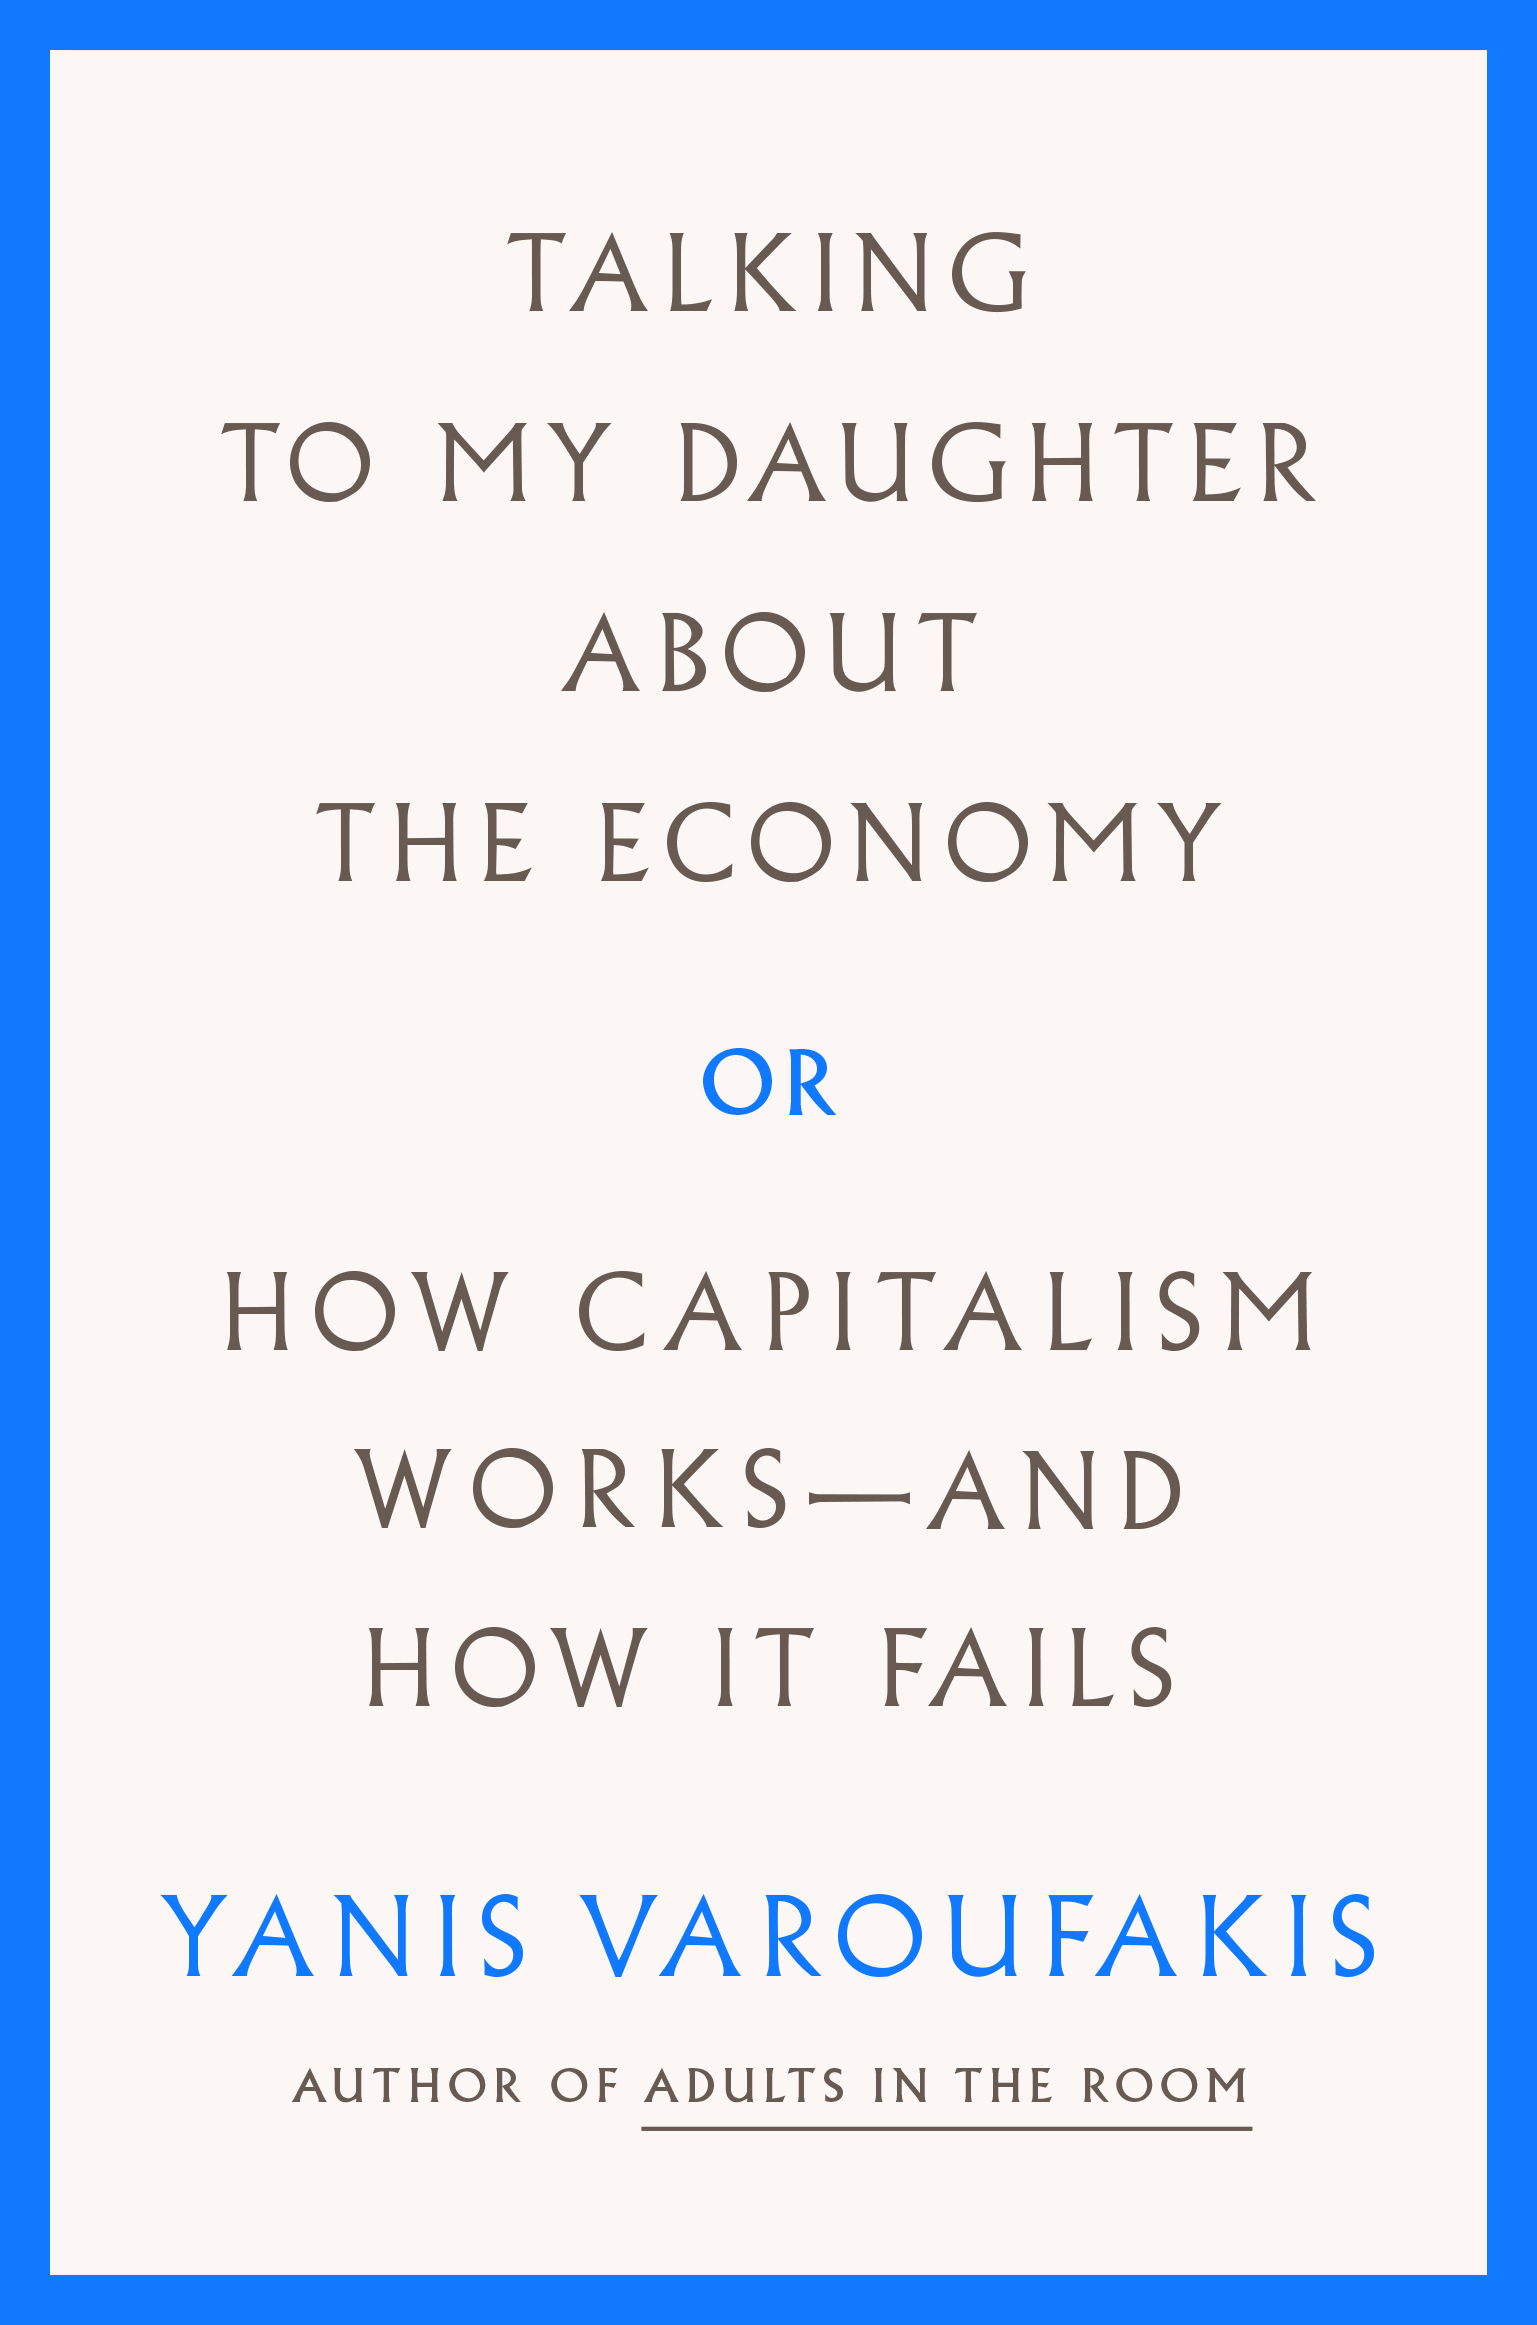 Talking to My Daughter About the Economy .JPG